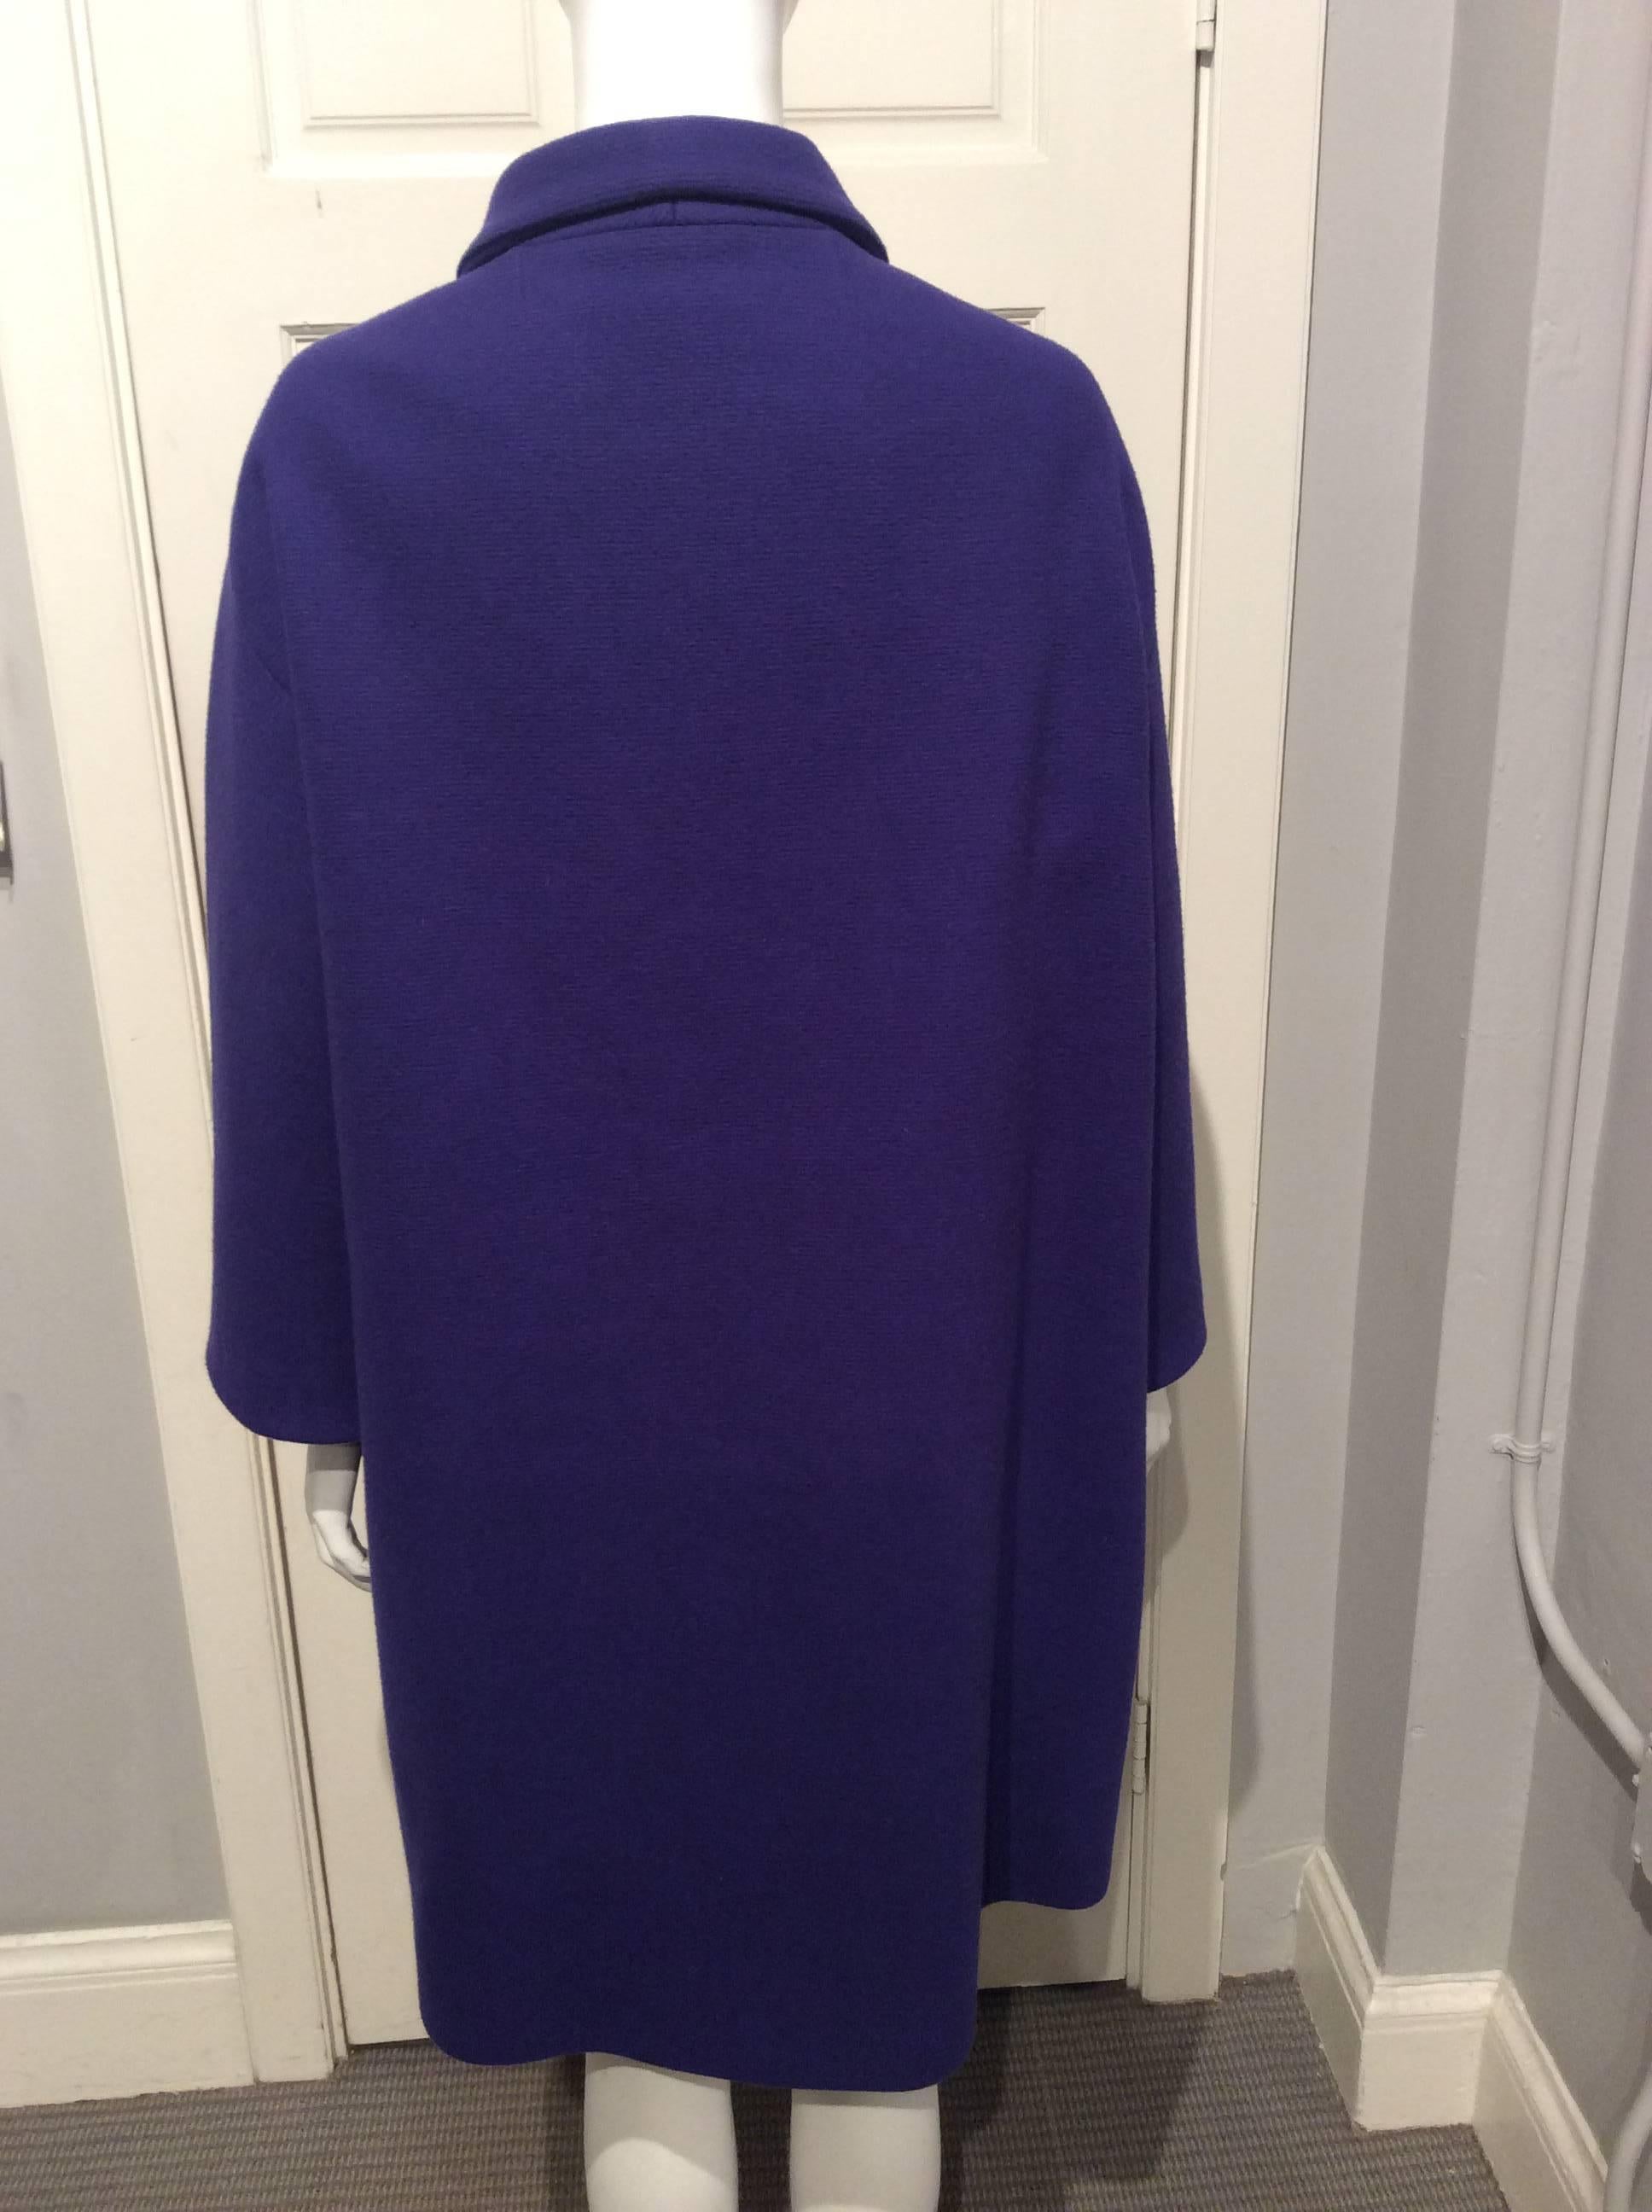 Balenciaga purple retro looking oversized wool coat with kimono sleeves. It has two slanted pockets in the front. The lining is silk.